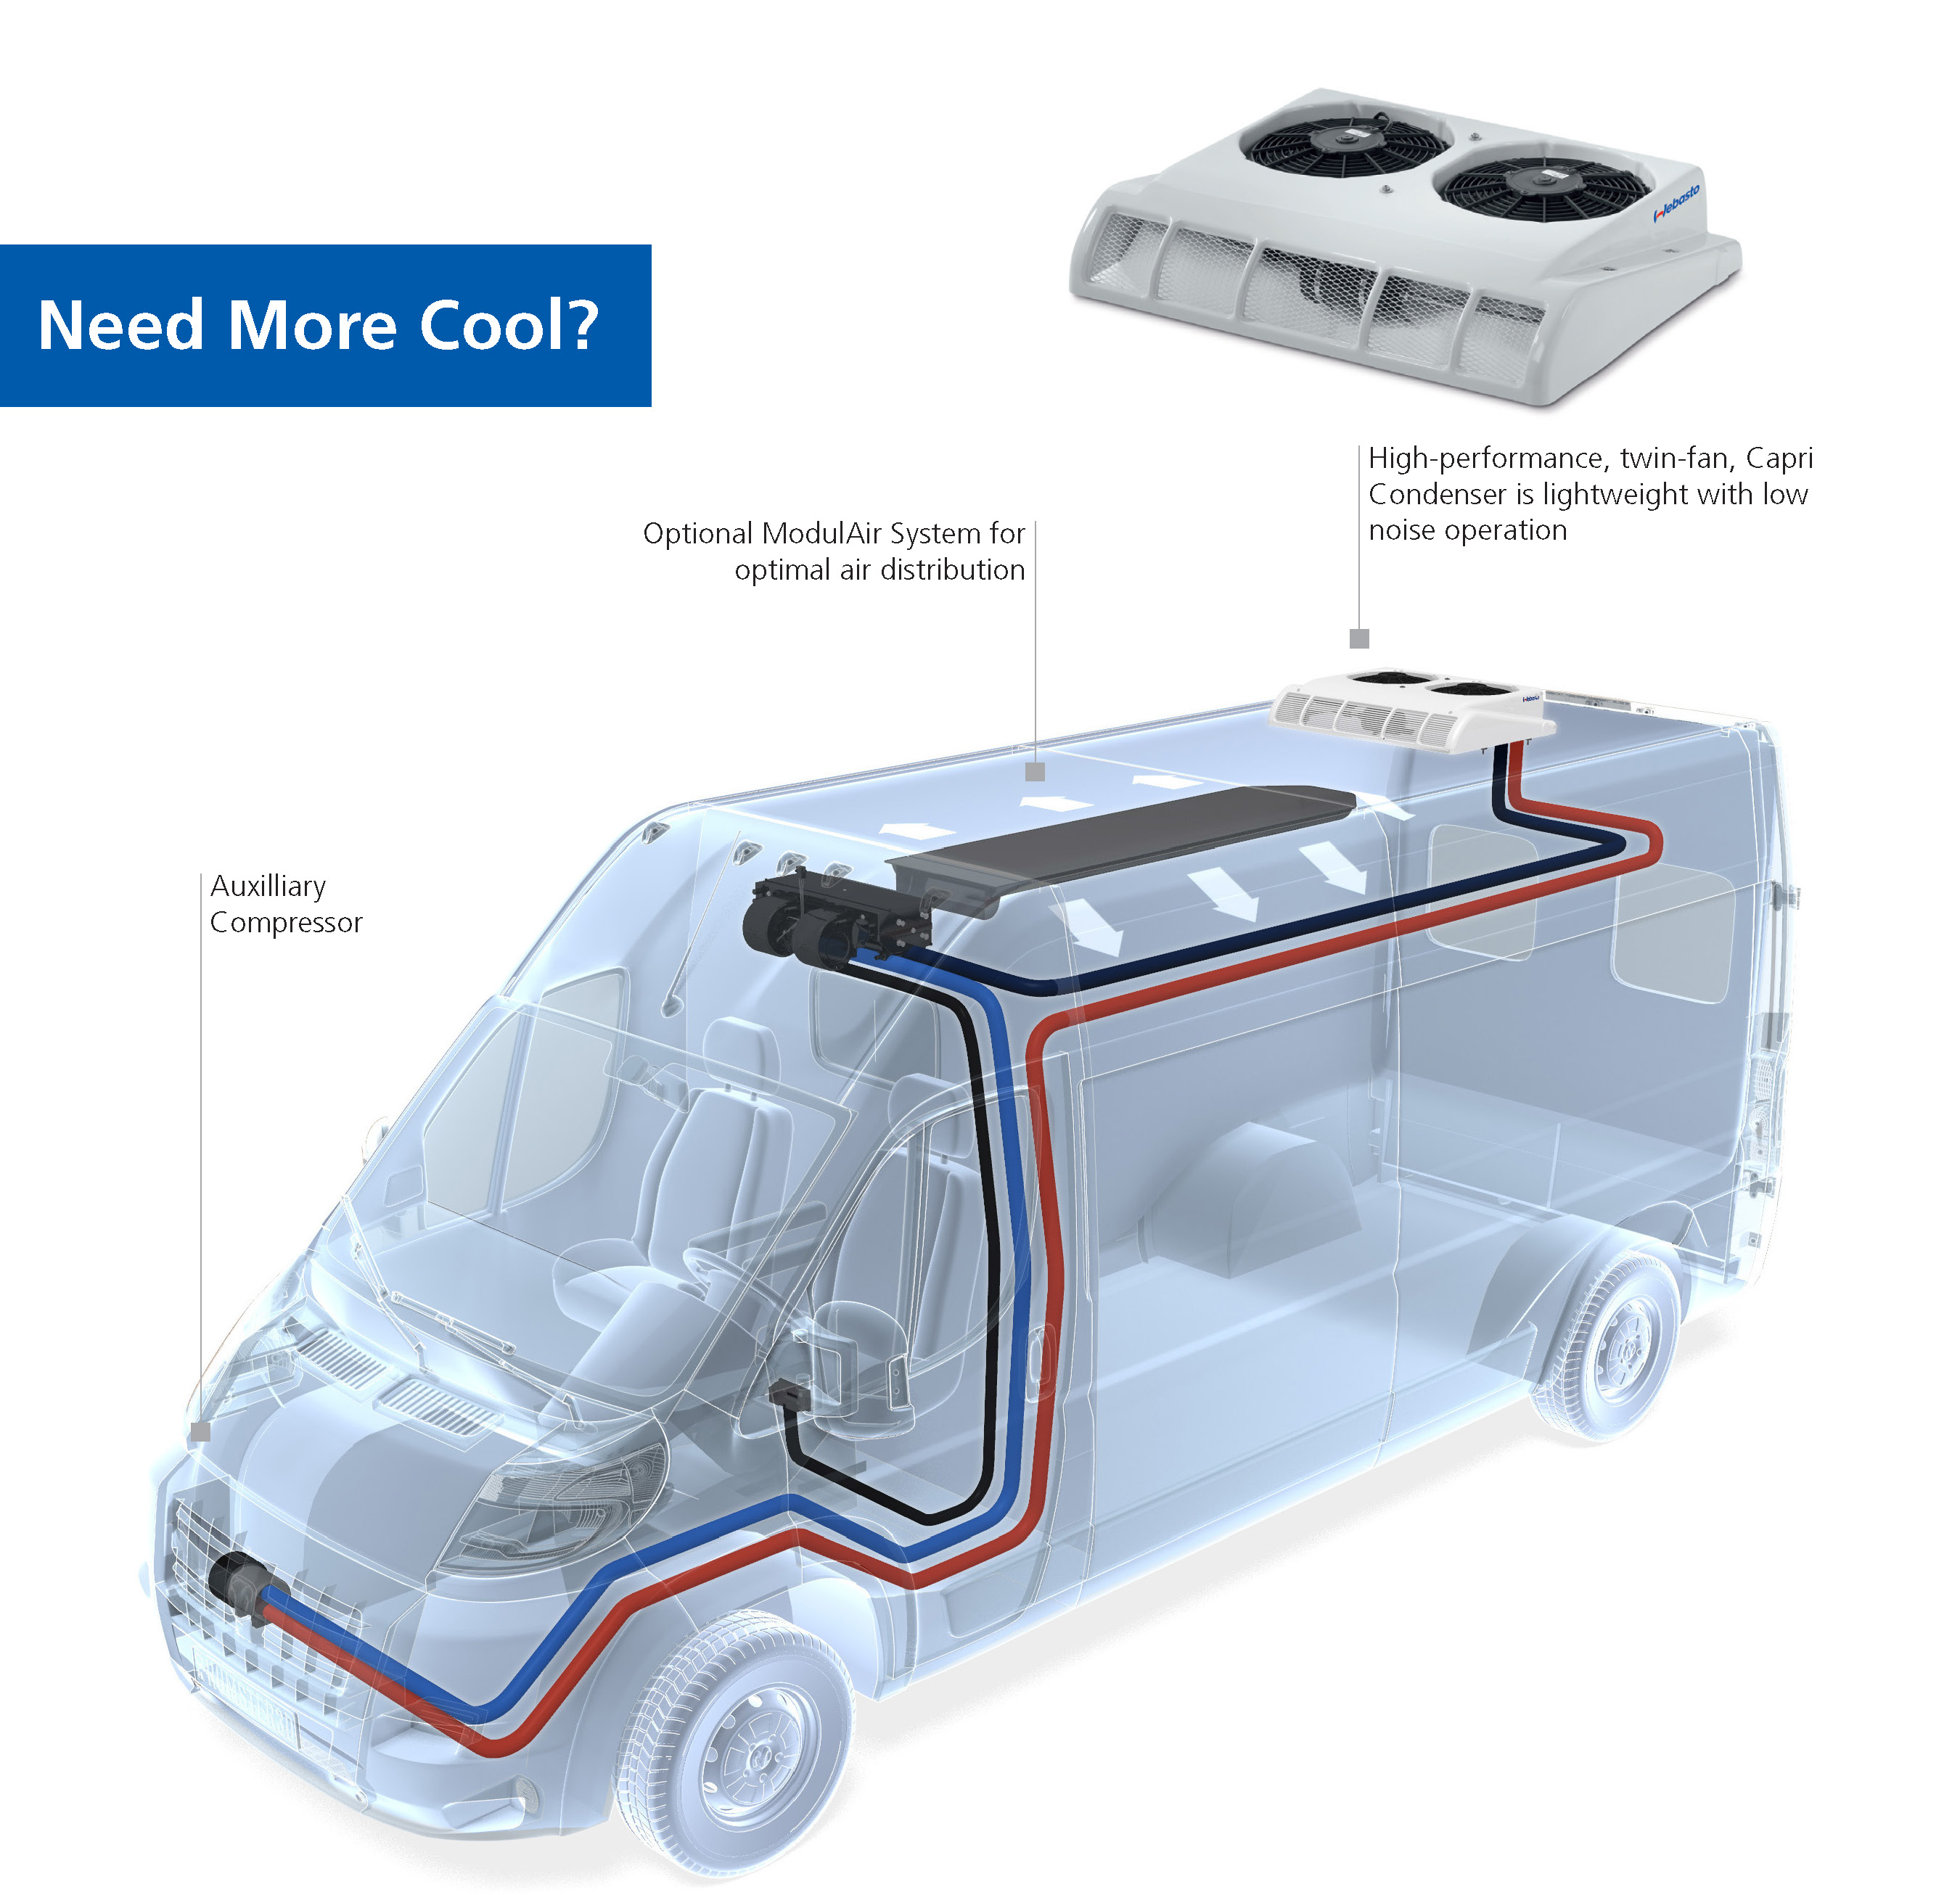 For warmer environments where higher cooling capacities are desired, Webasto has introduced the Extreme Climate HVAC aftermarket system.